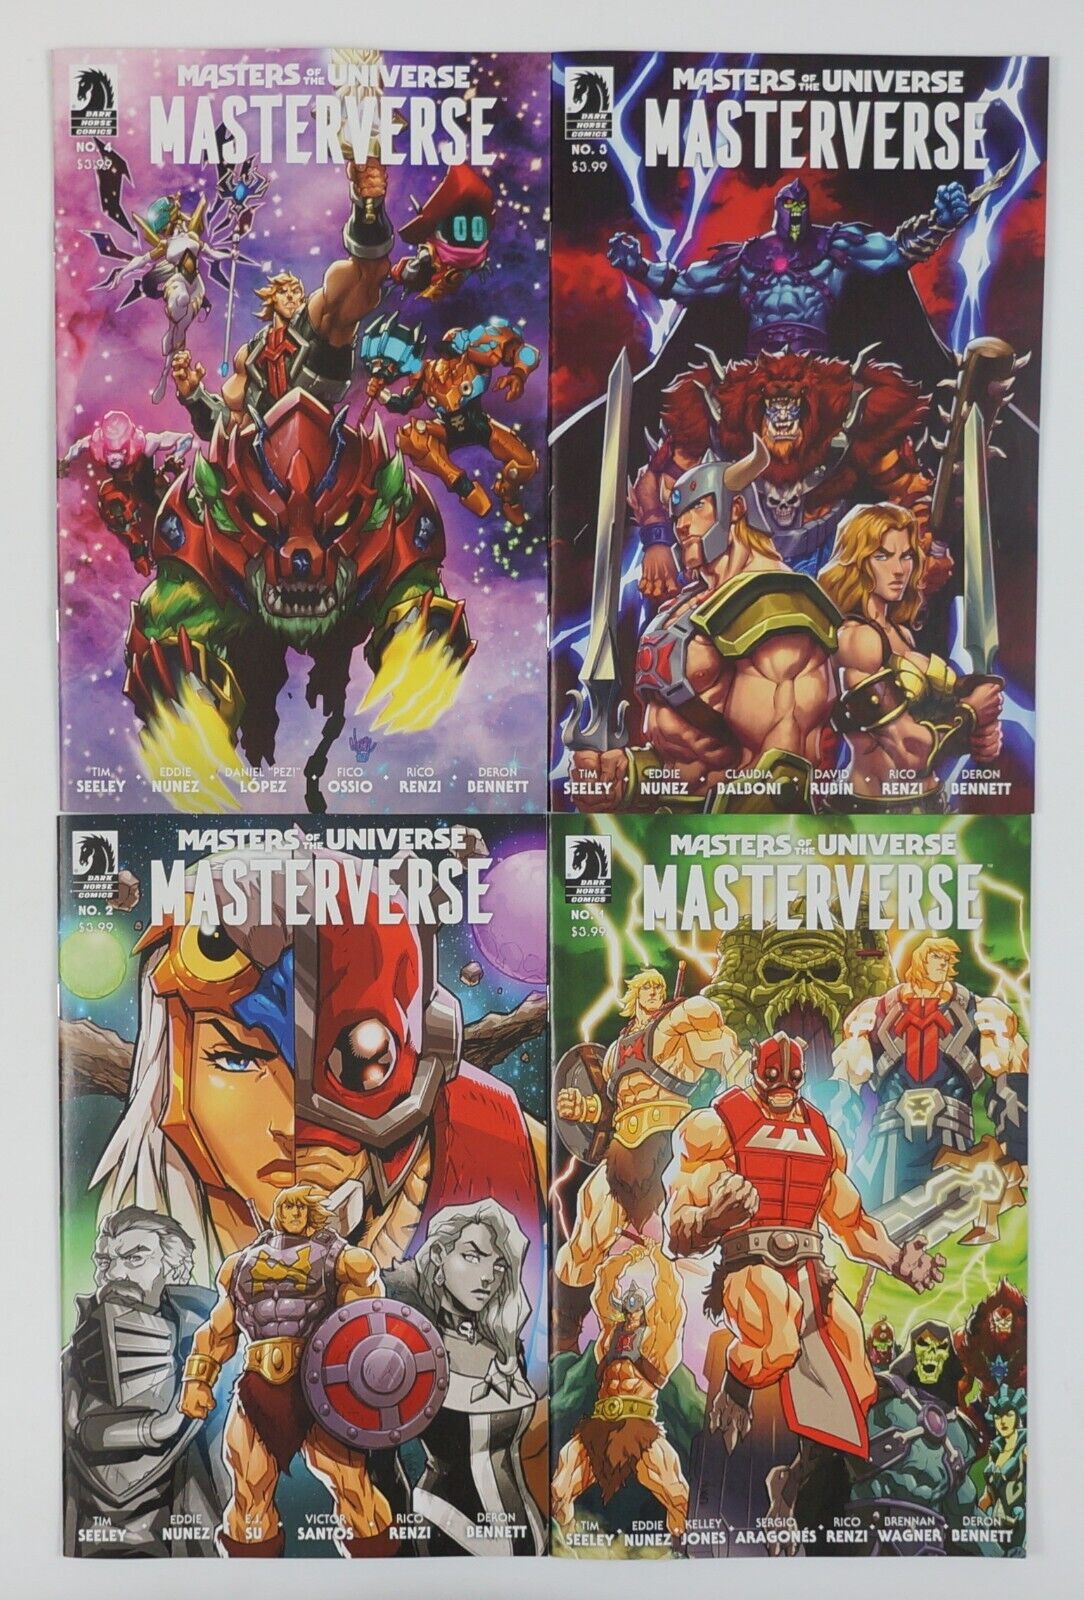 Masters of the Universe: Masterverse #1-4 VF/NM complete series - all A variants